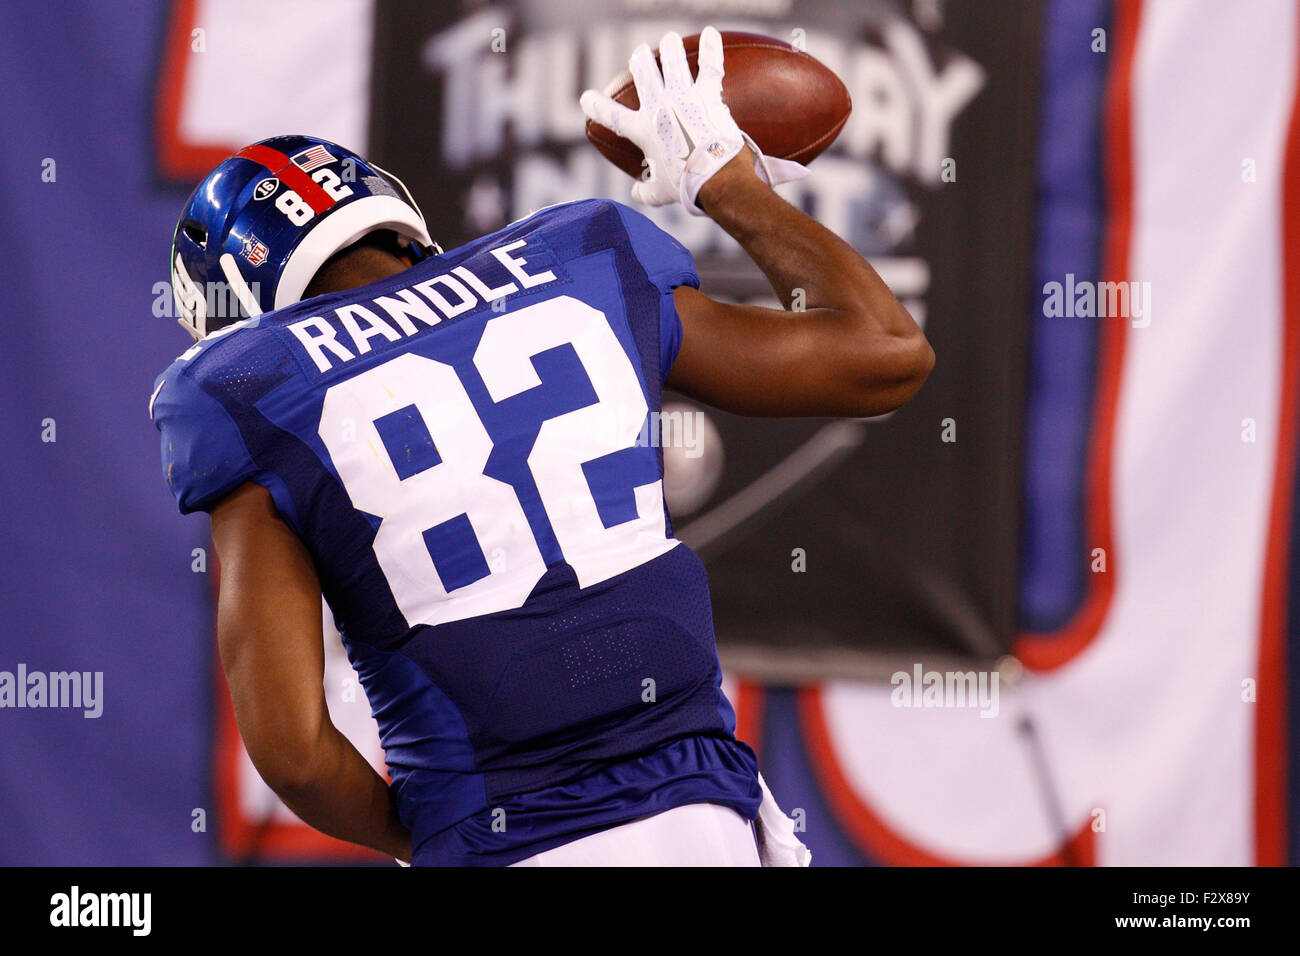 East Rutherford, New Jersey, USA. 24th September, 2015. New York Giants wide receiver Rueben Randle (82) reacts to his touchdown catch during the NFL game between the Washington Redskins and the New York Giants at MetLife Stadium in East Rutherford, New Jersey. The New York Giants won 32-21. Christopher Szagola/CSM/Alamy Live News Stock Photo